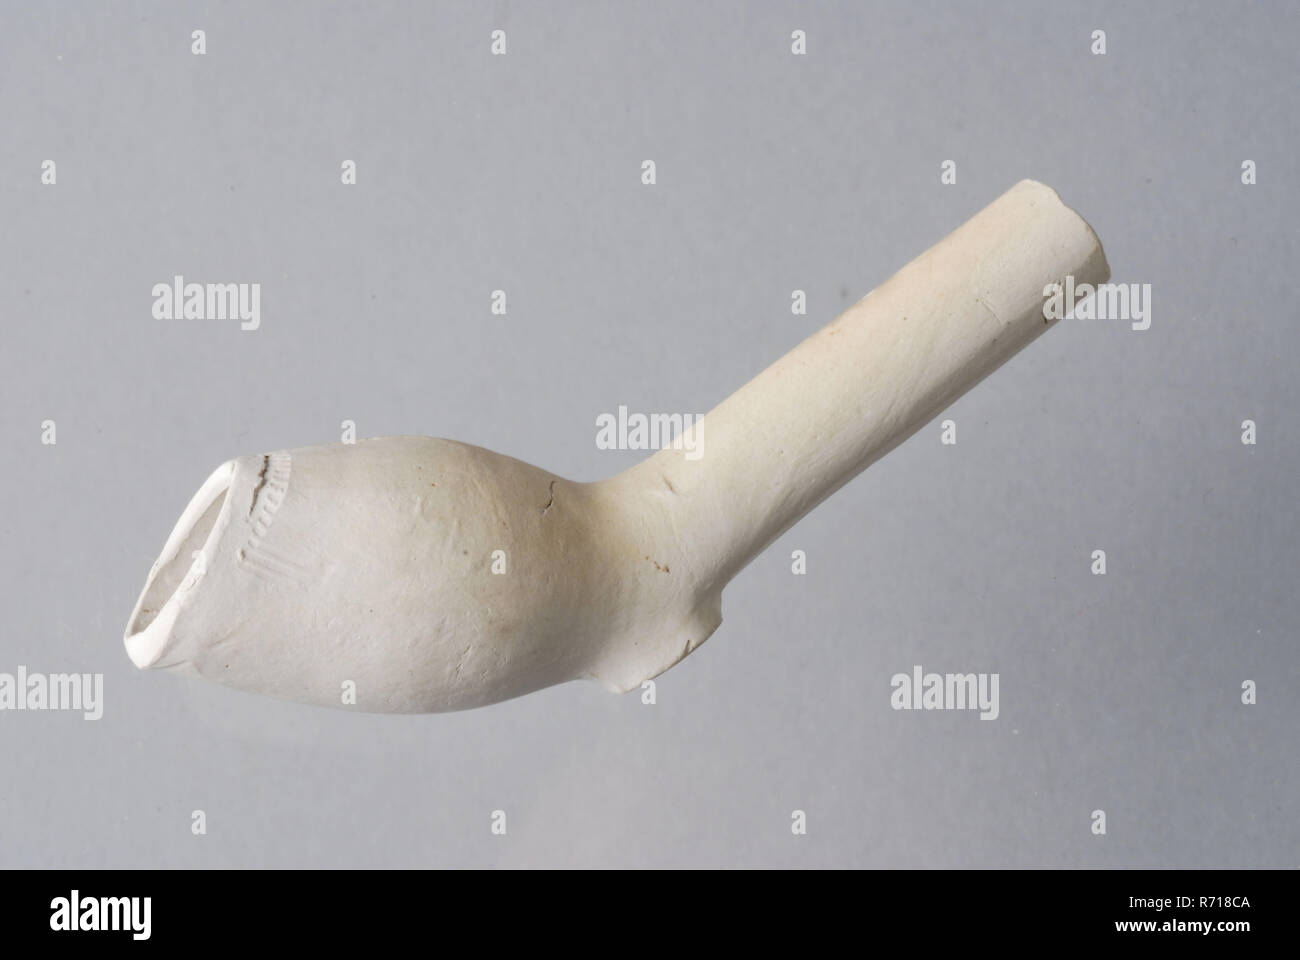 Hendrick Jansz., Clay pipe, unnoticed, from the waste from Rotterdam pipe making, clay pipe smoking equipment smoking ground find ceramics pottery, pressed finished baked Clay pipe unnoticed from the waste of Rotterdam pipe making archeology Rotterdam Hillegersberg-Schiebroek Hillegersberg Noord Hillegersberg Zuid Rottekade indigenous pottery craft workplace smoking tobacco Hendrick Jansz archaeological find in the soil: Judge Rottekade Rotterdam at number 71 in 1976. Stock Photo